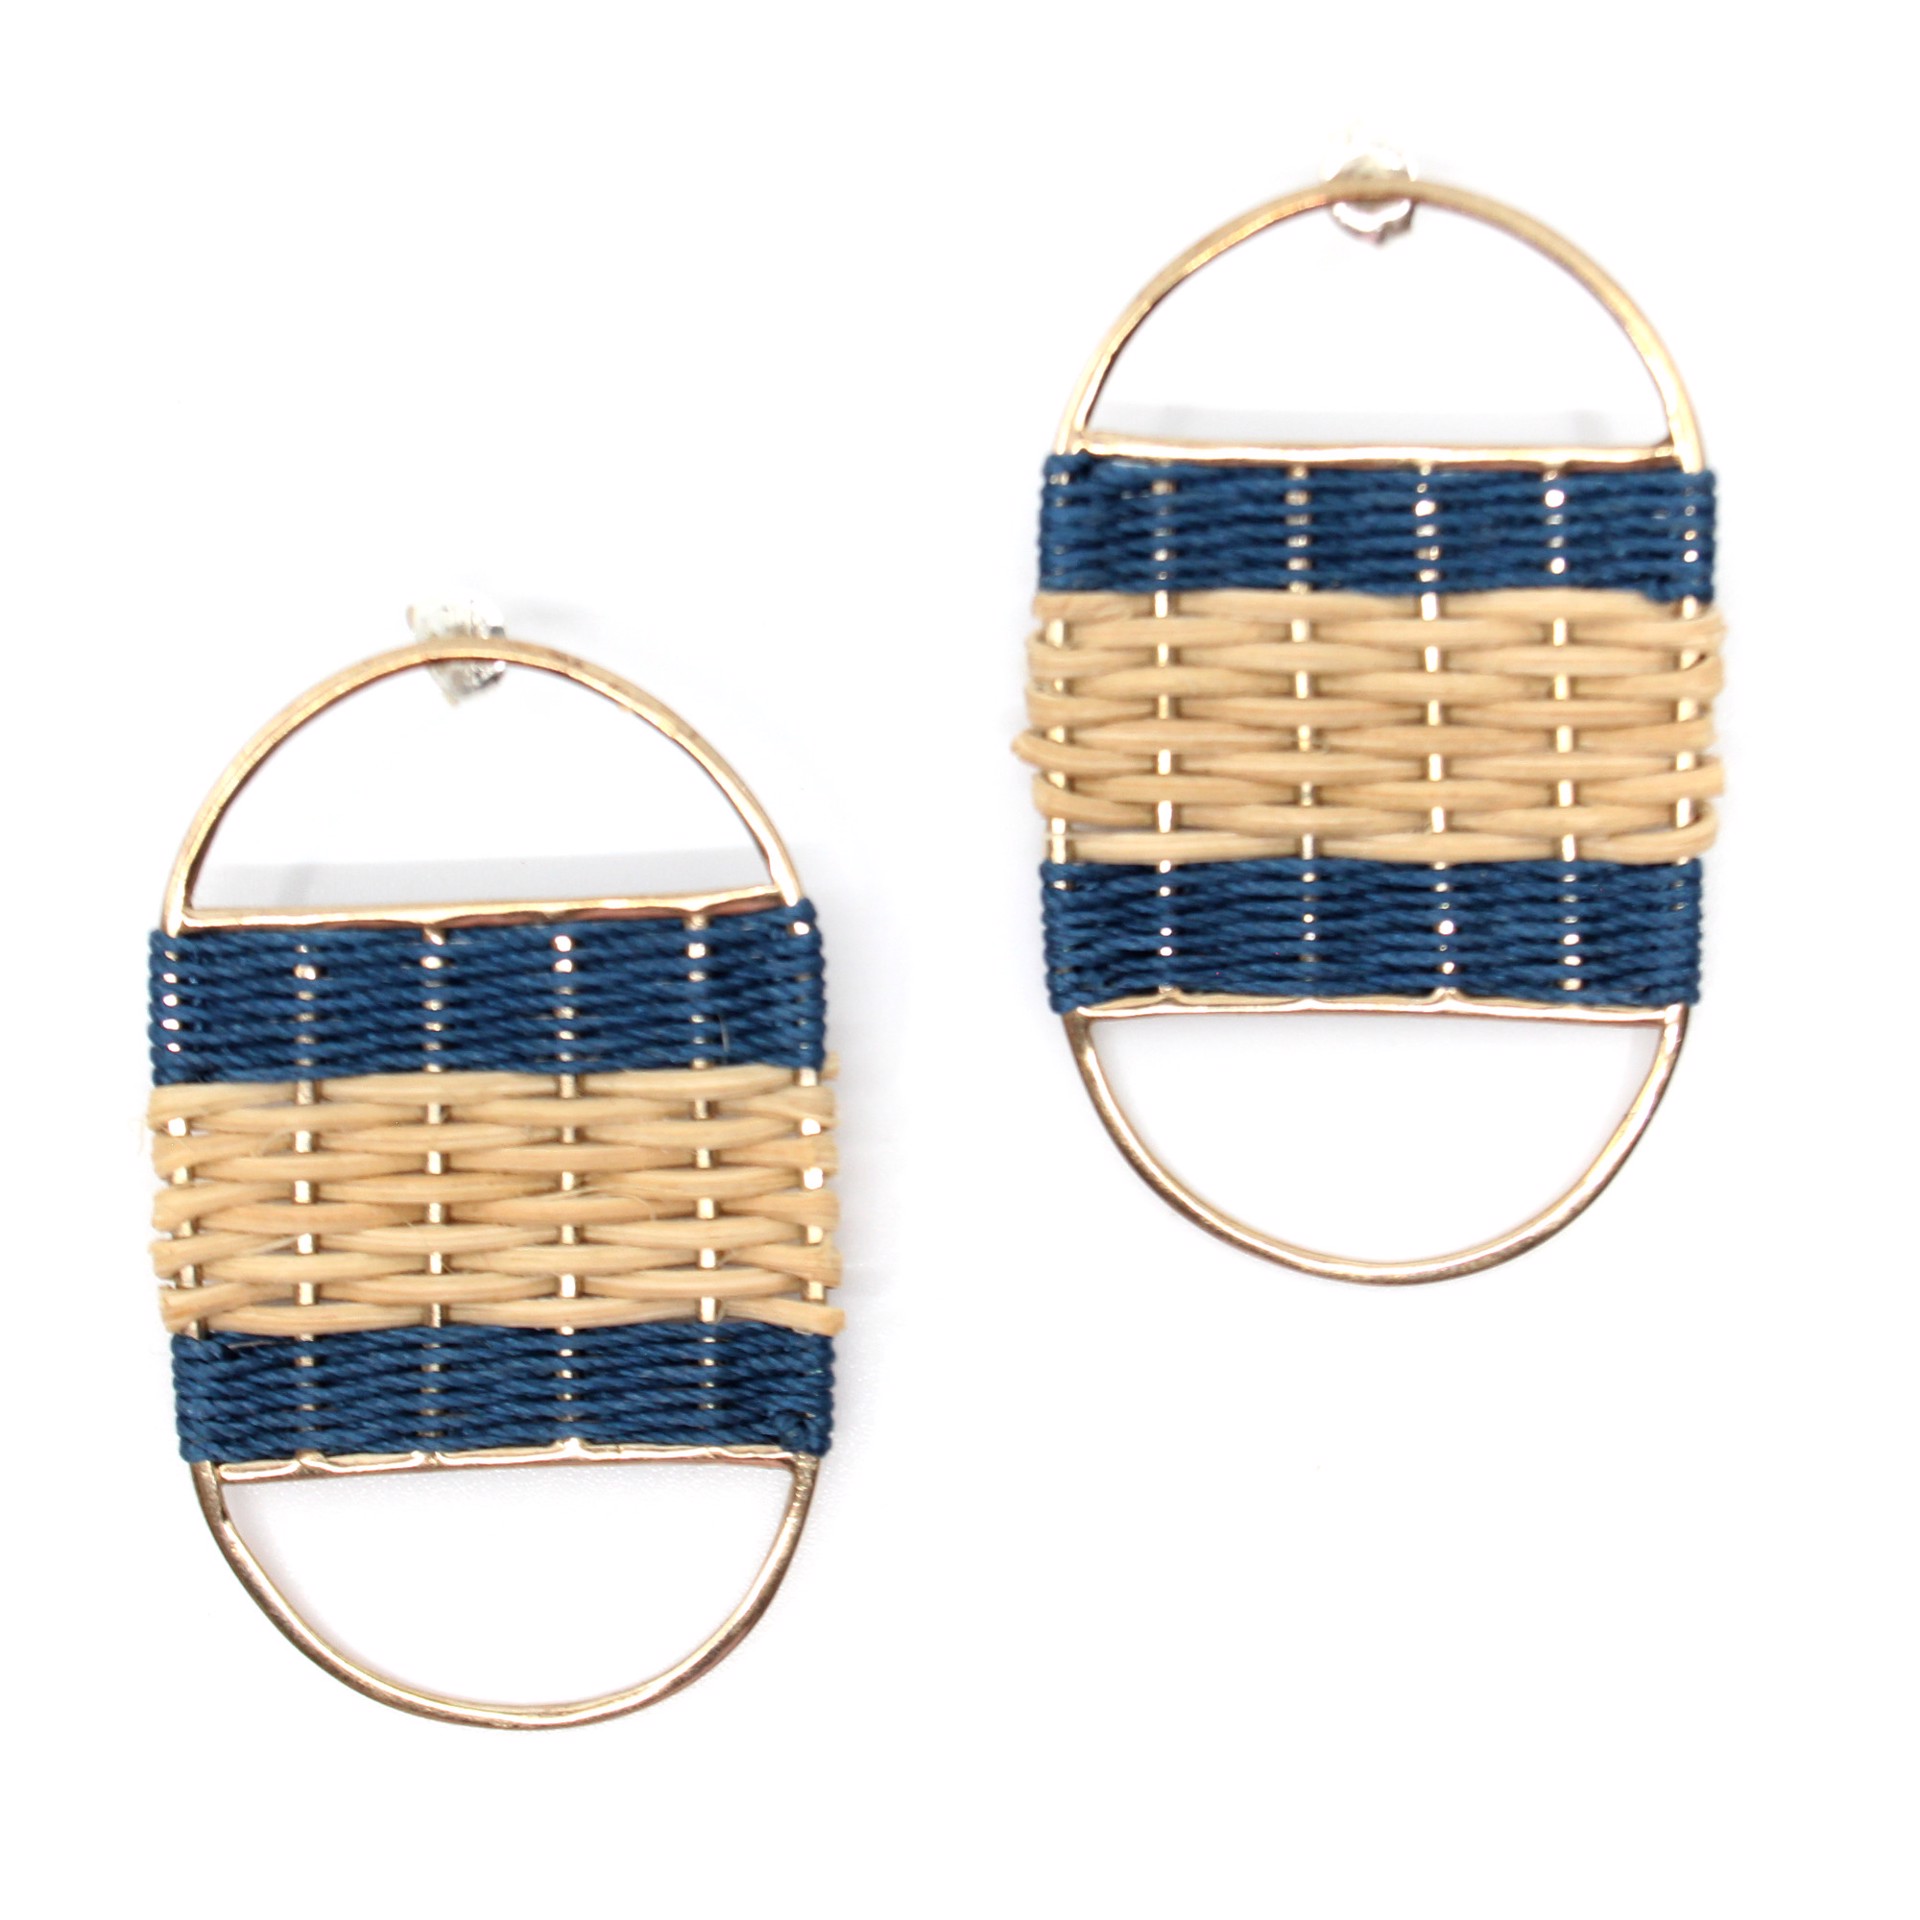 Sunset studs (blue + reed) by Flag Mountain Jewelry